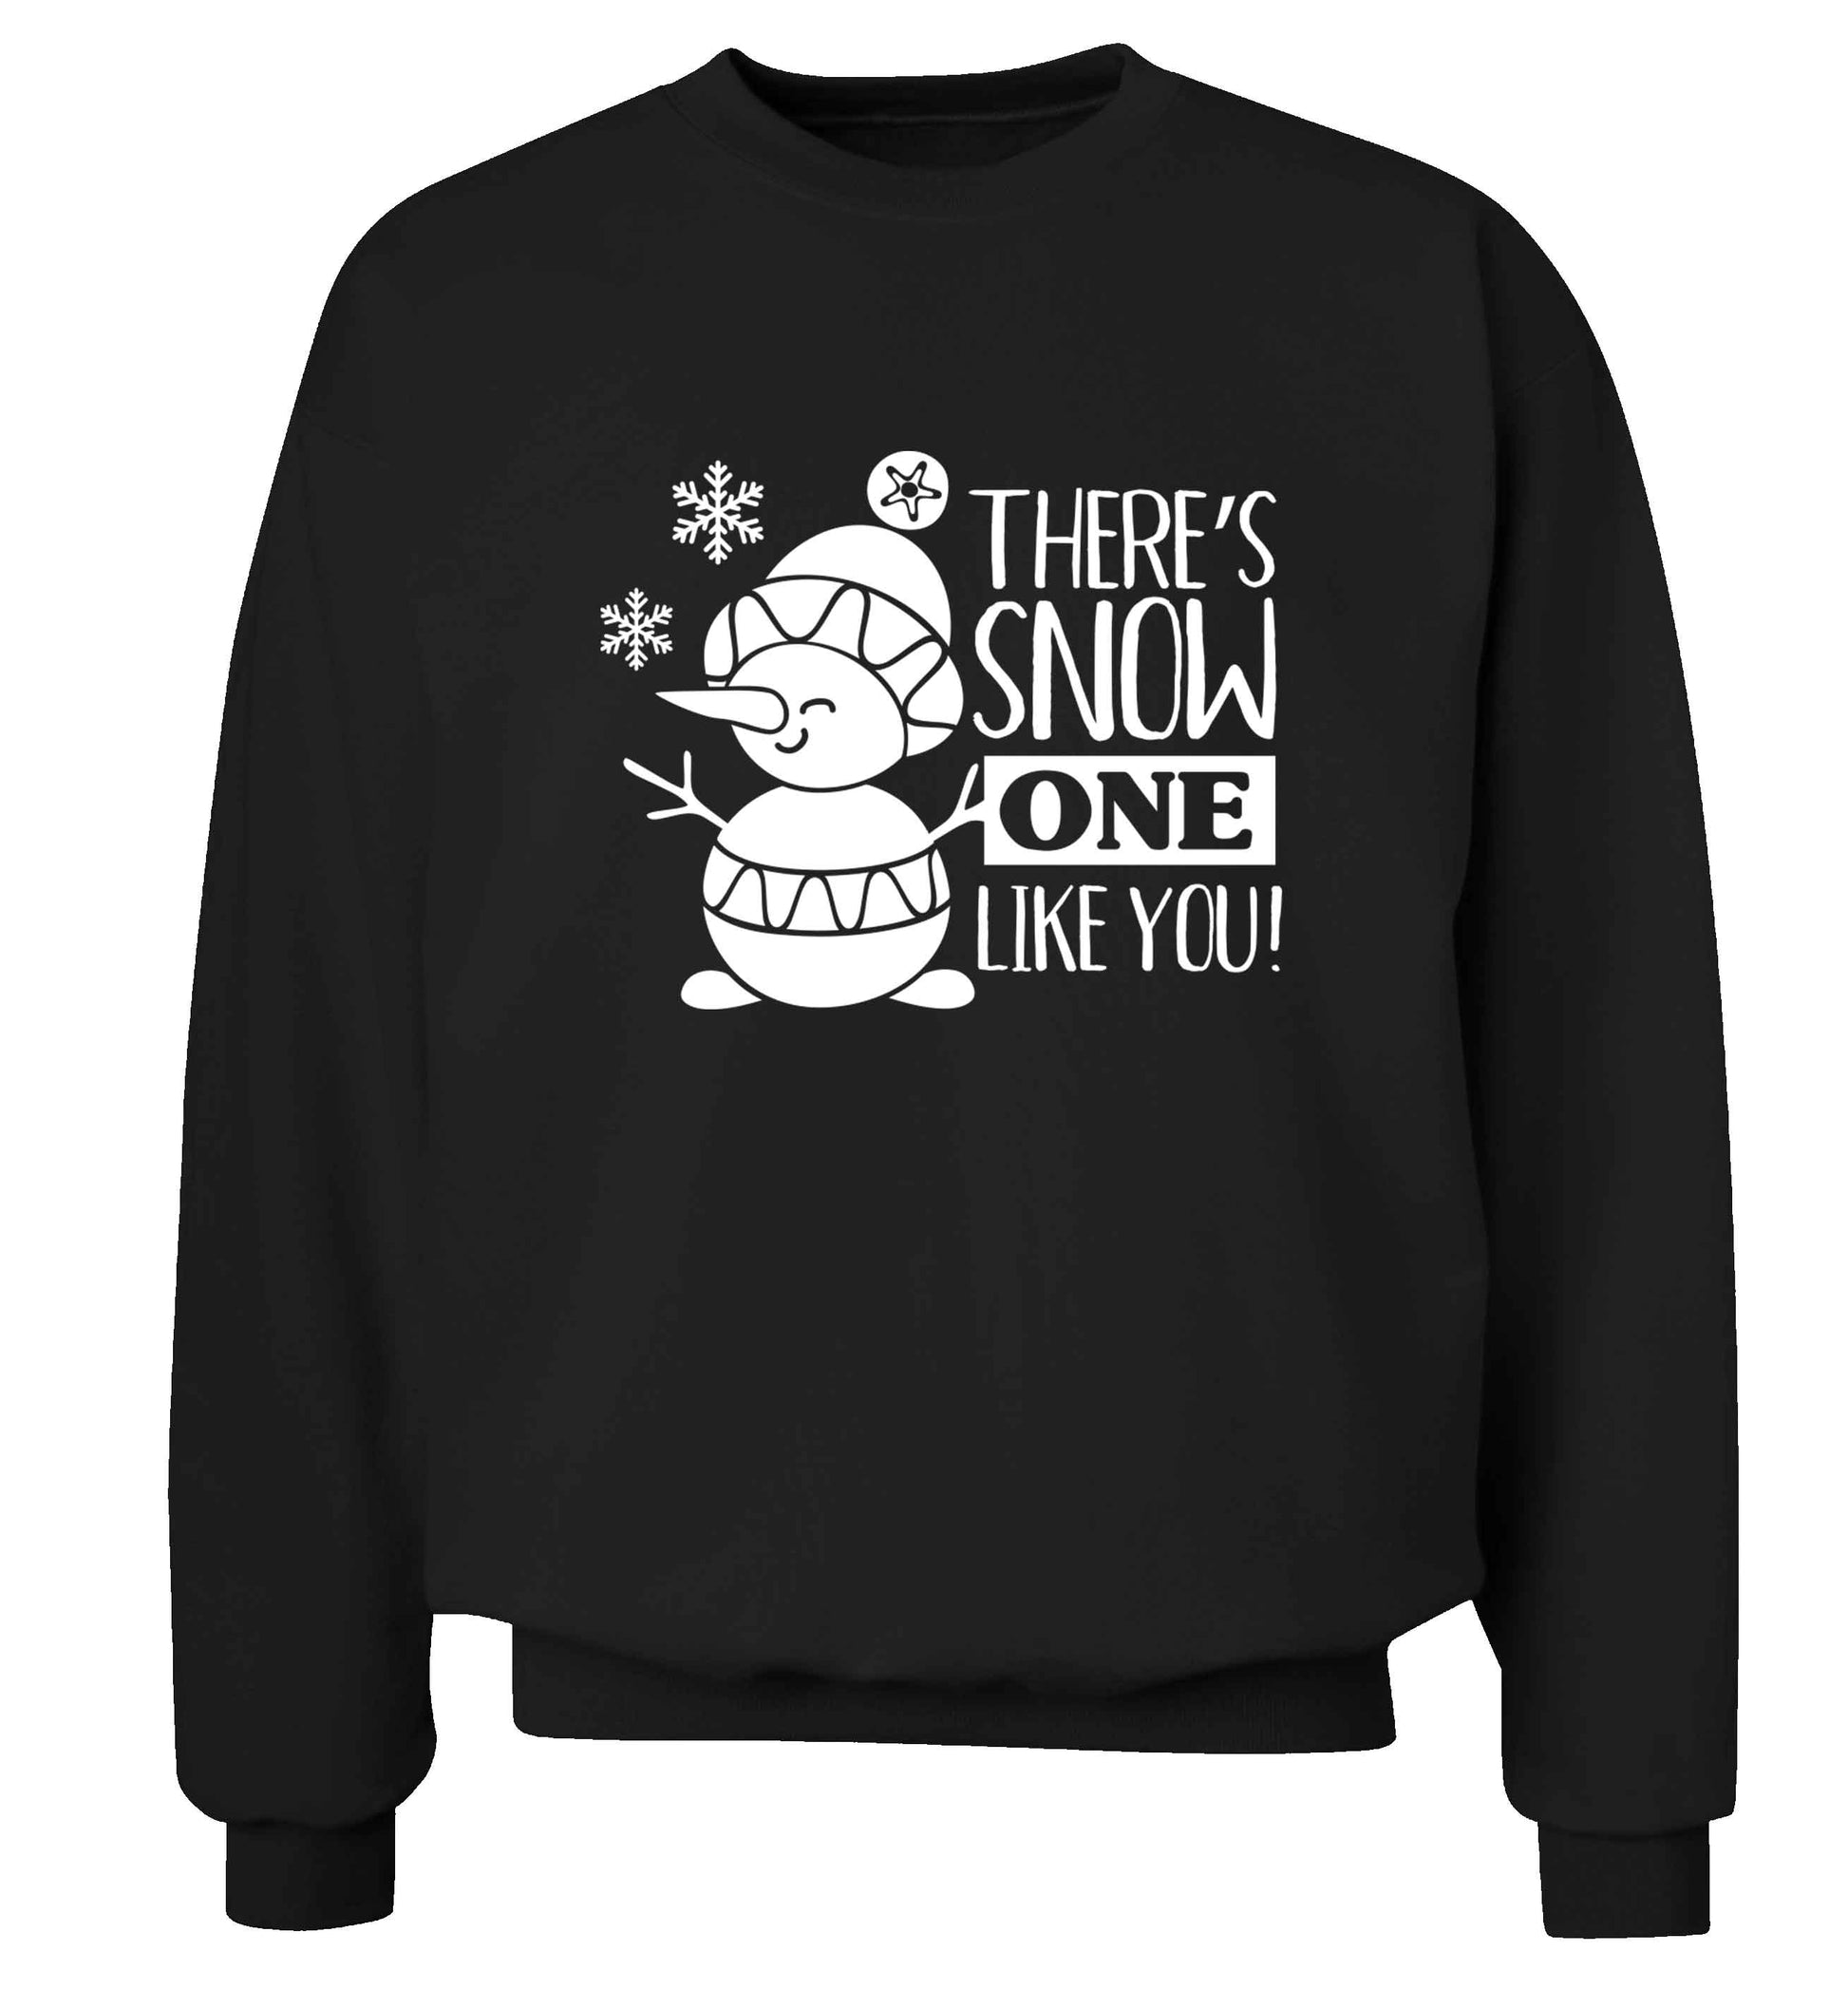 There's snow one like you adult's unisex black sweater 2XL